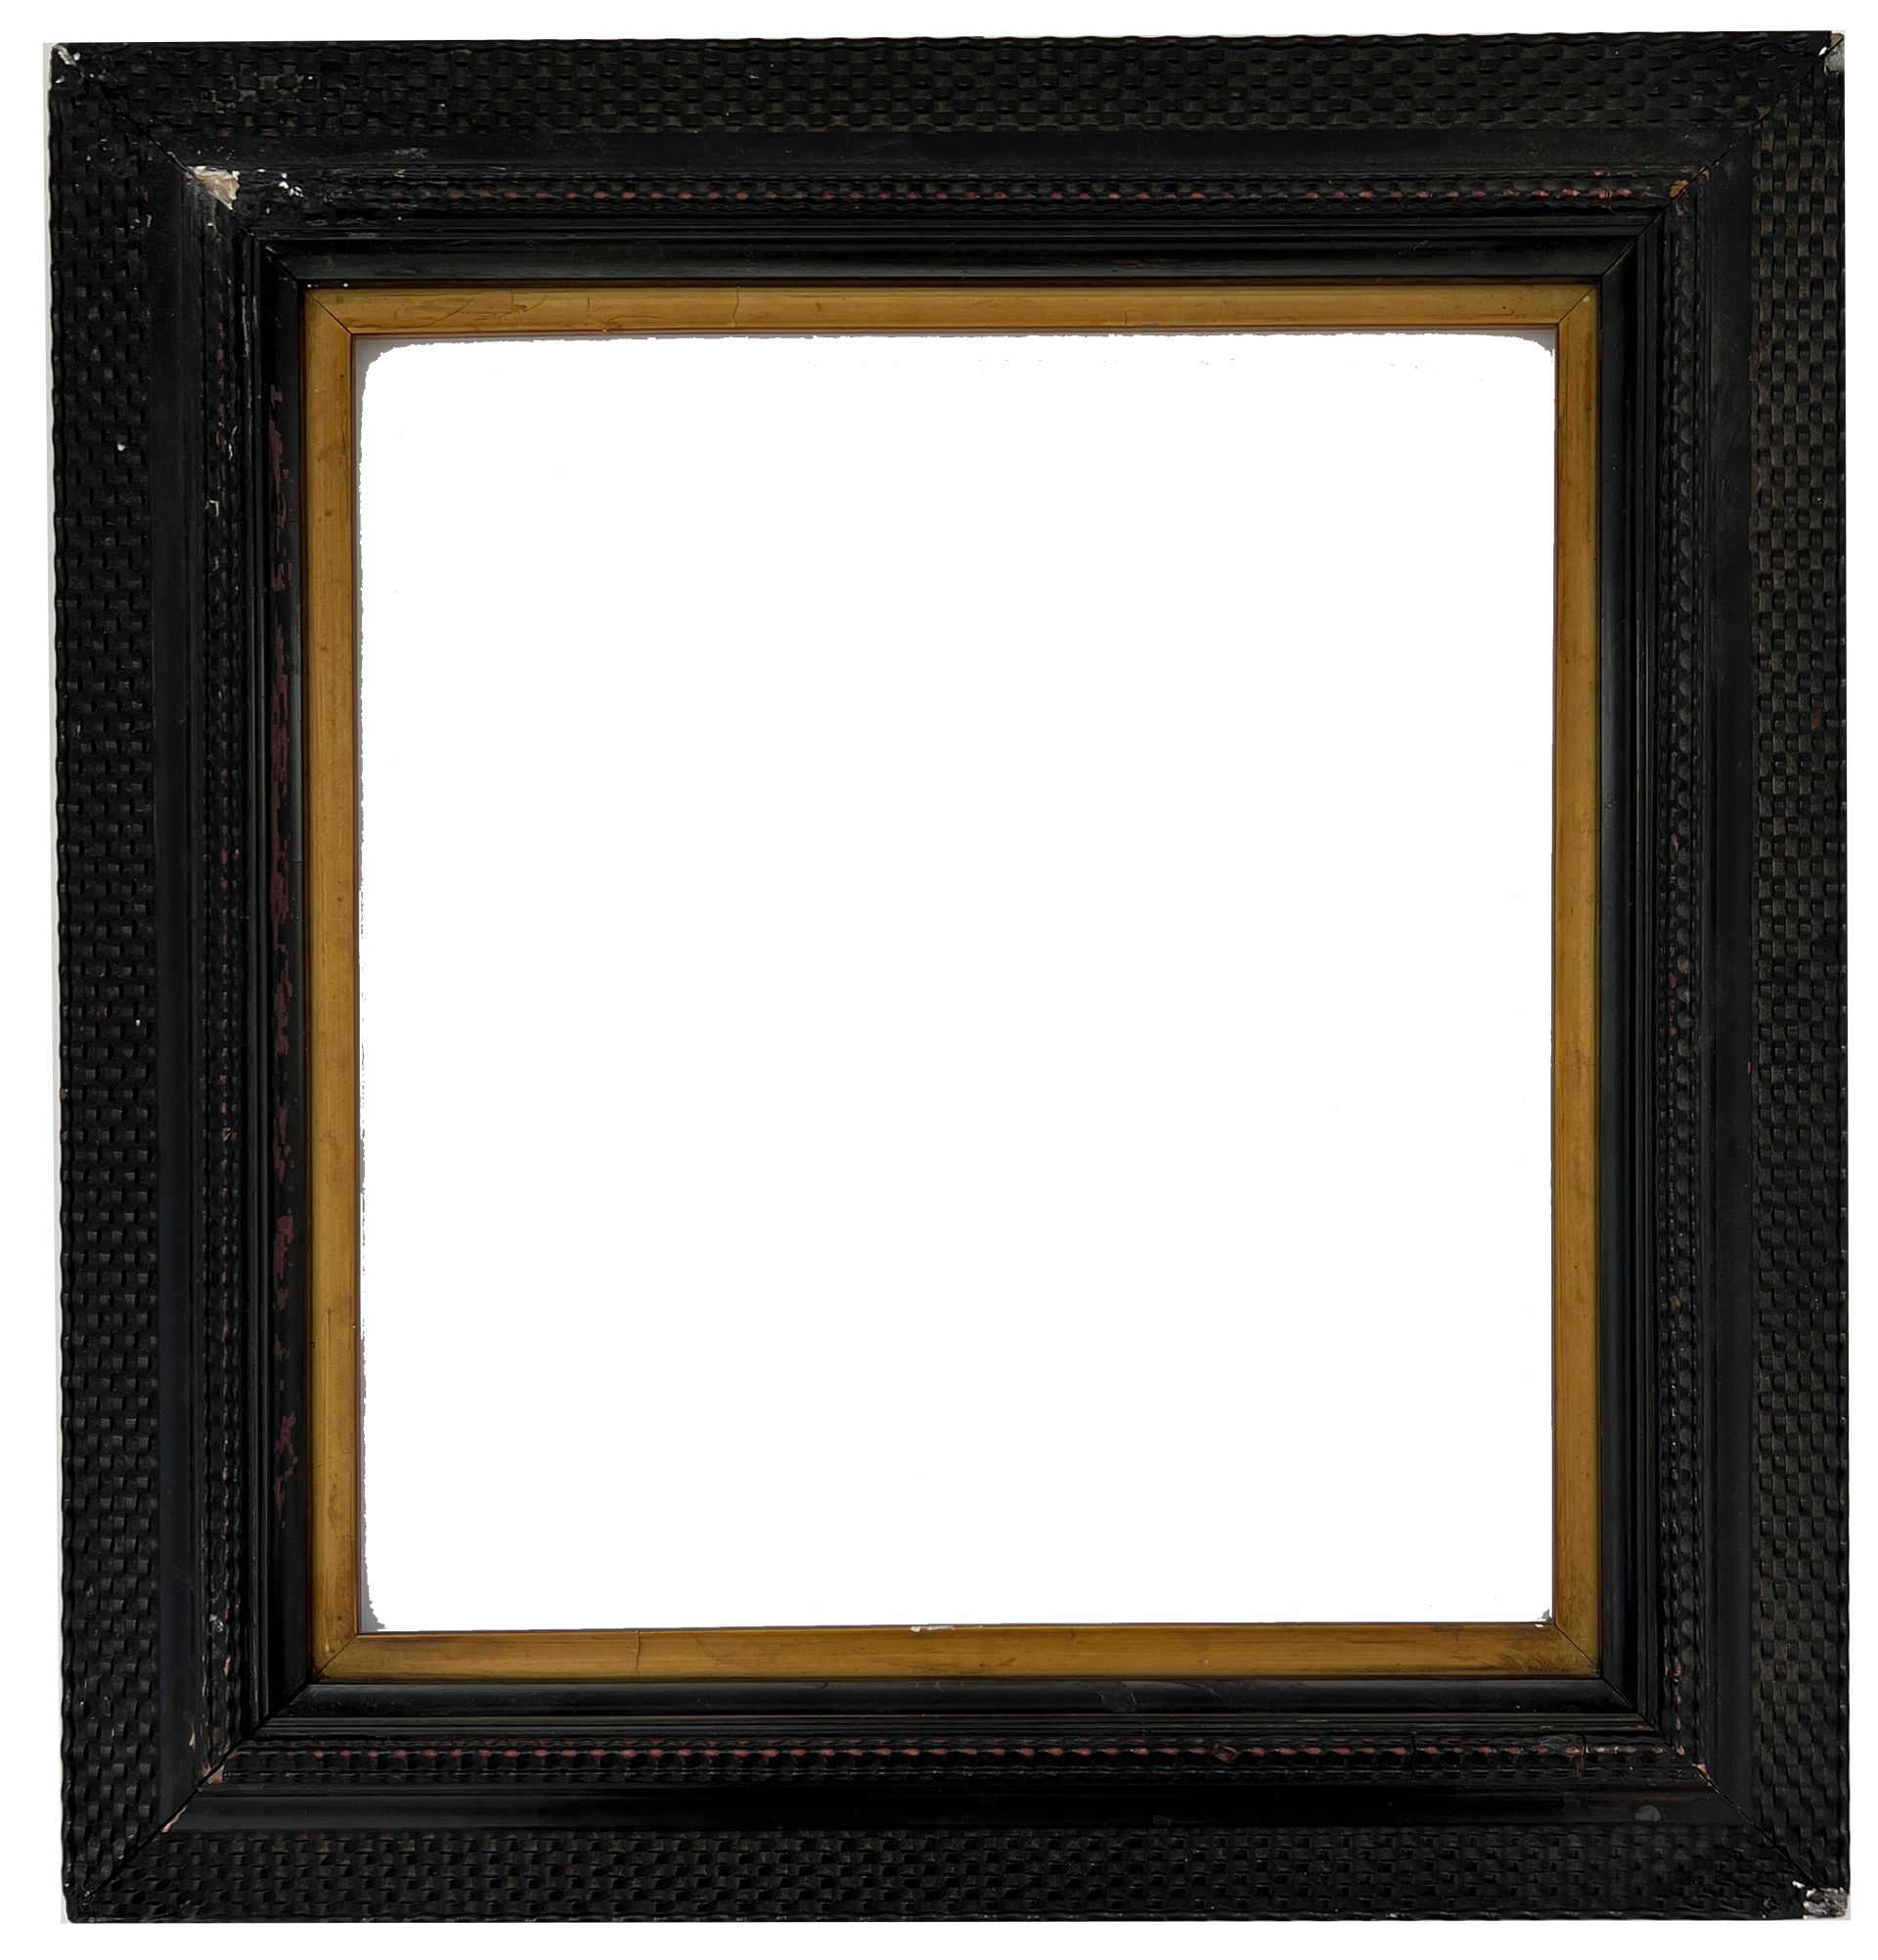 Antique Guilloche Frame with Gold Filet by Antique Frame